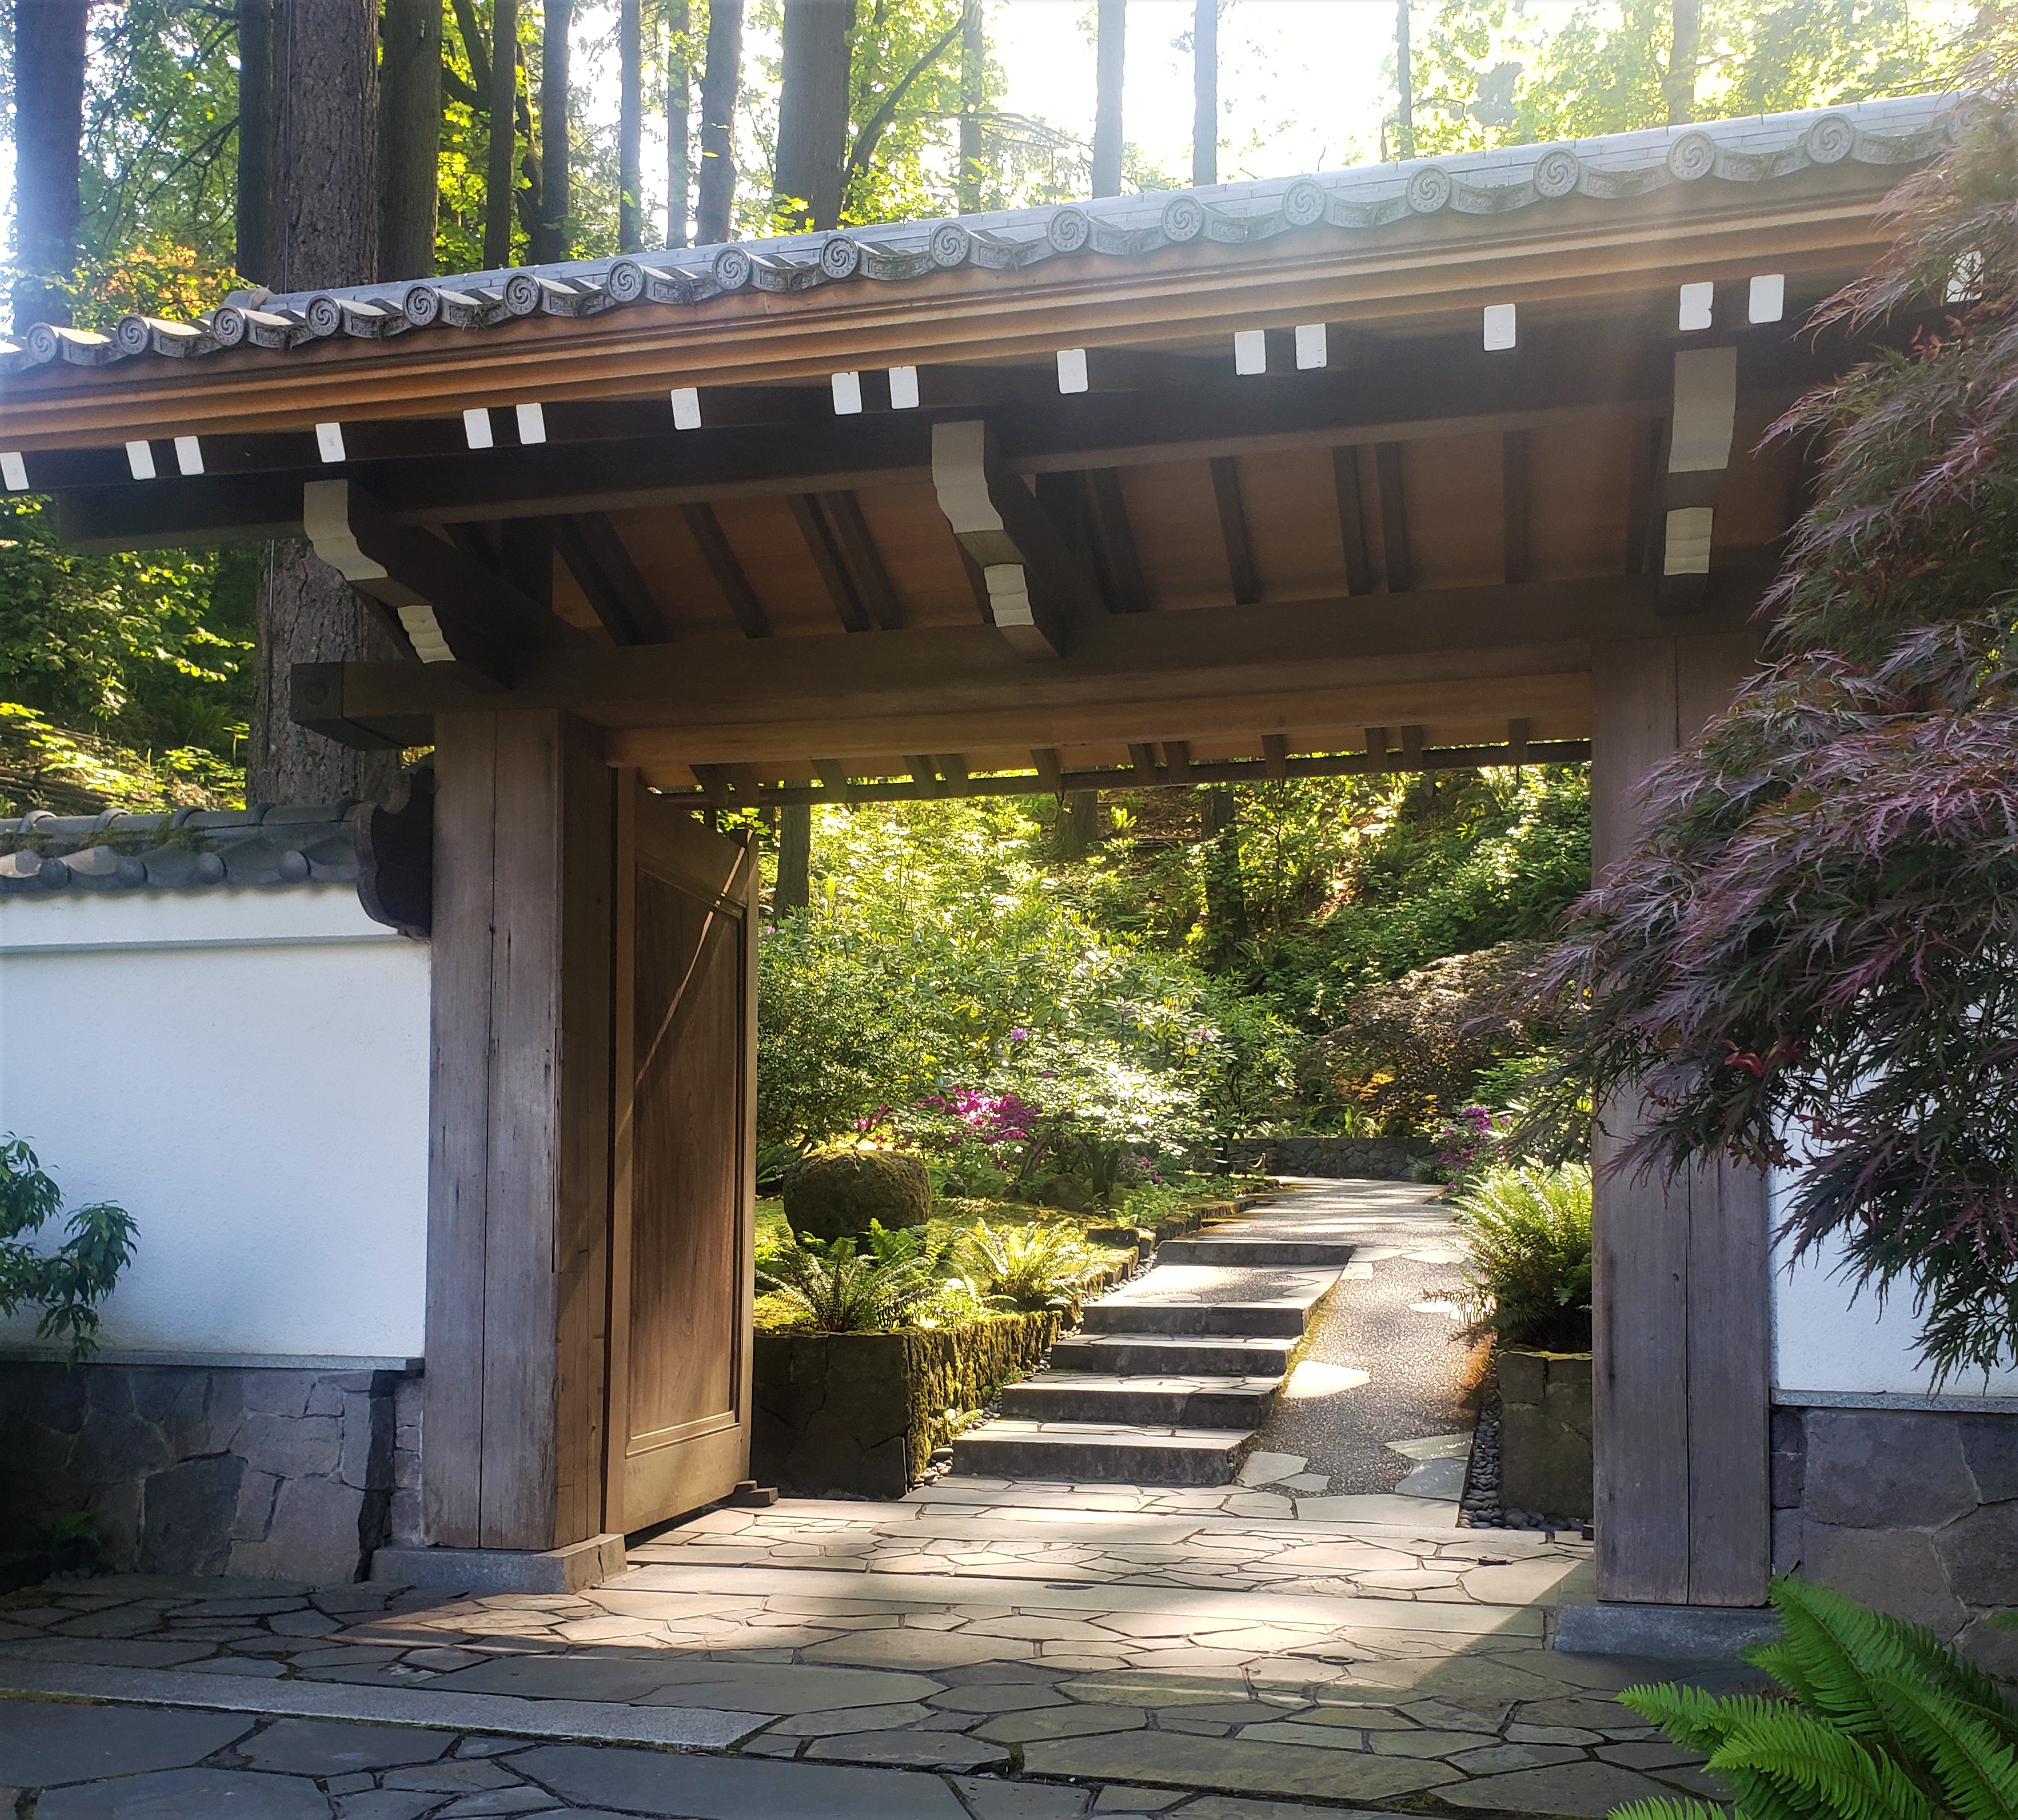 Gate leading to the Portland Japanese Garden